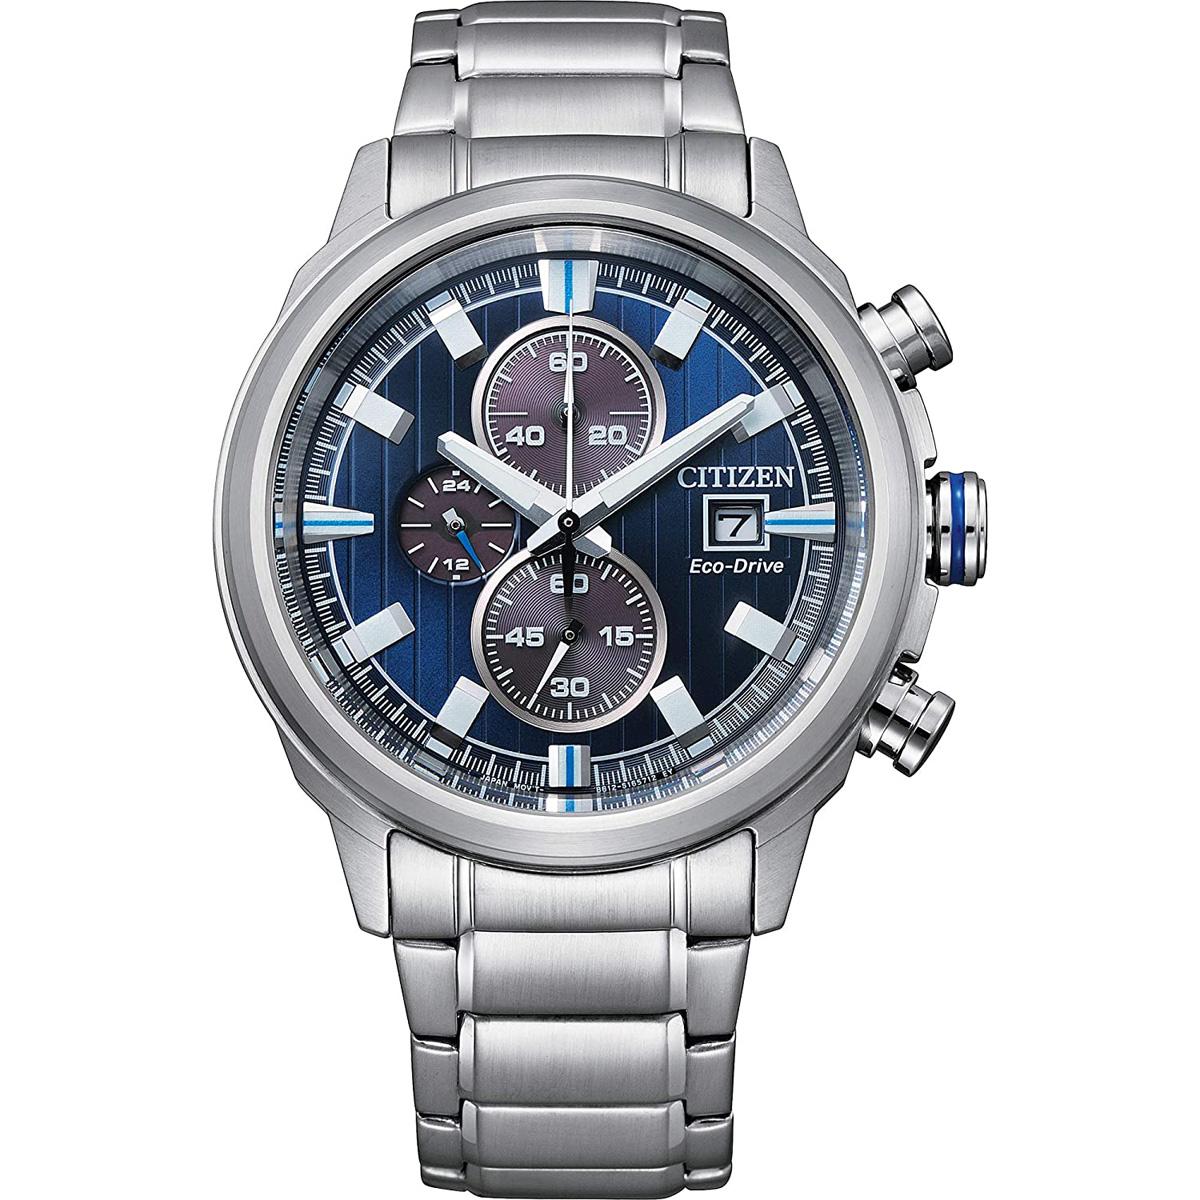 Citizen Eco-Drive Brycen Chronograph Mens Stainless Steel Watch for $142.79 Shipped